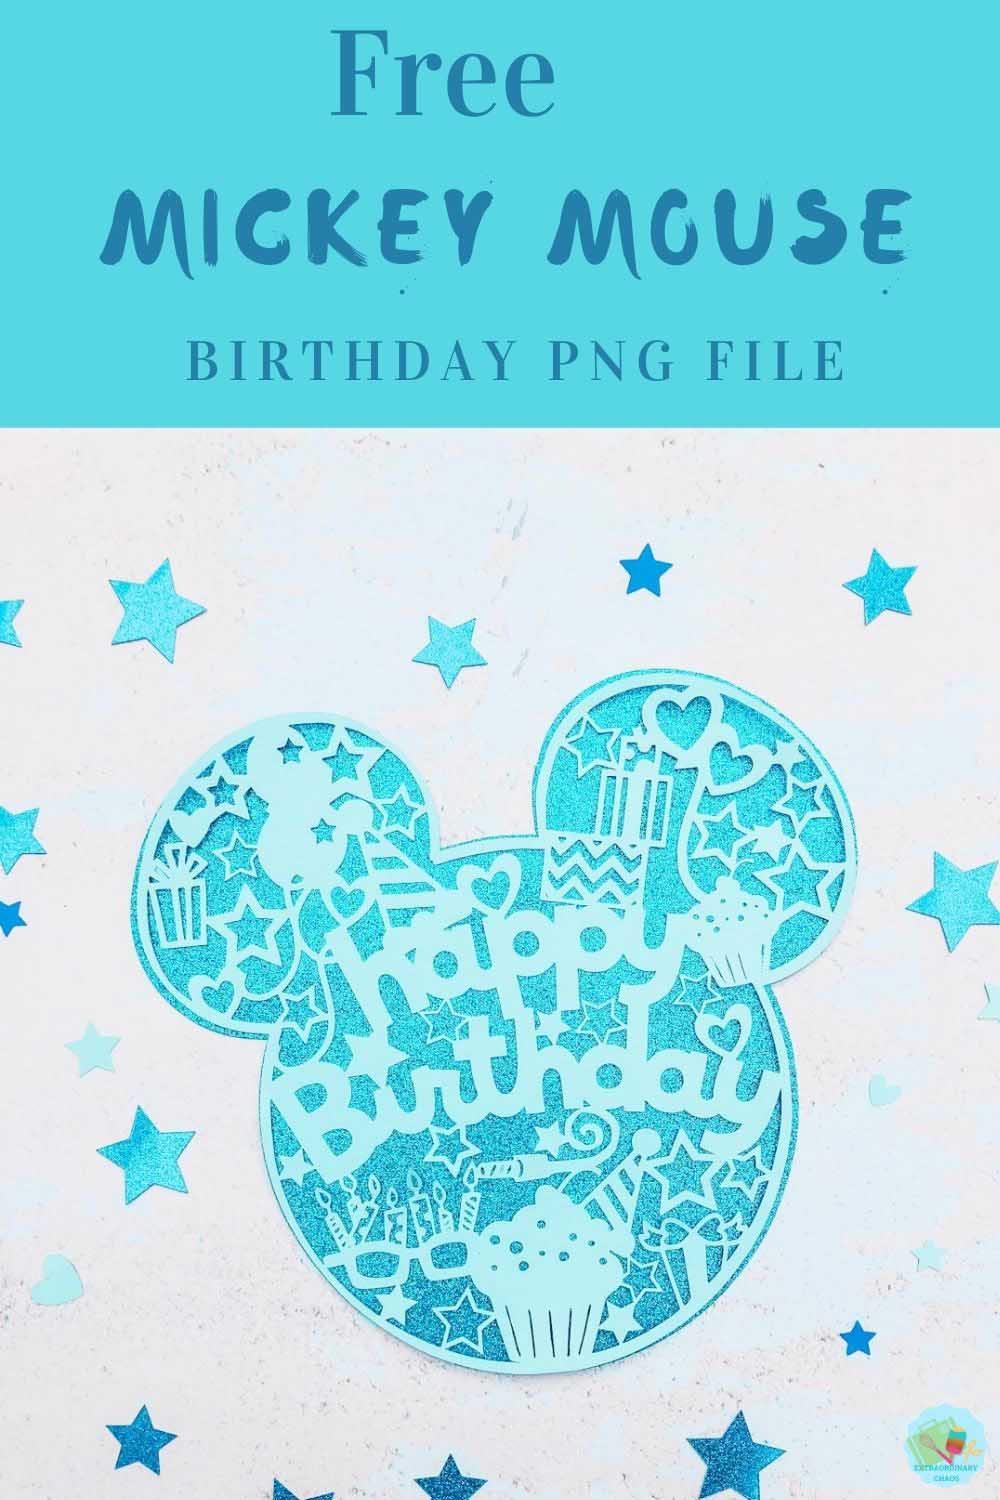 Free Mickey Mouse Birthday png file for Cricut and Silhouette